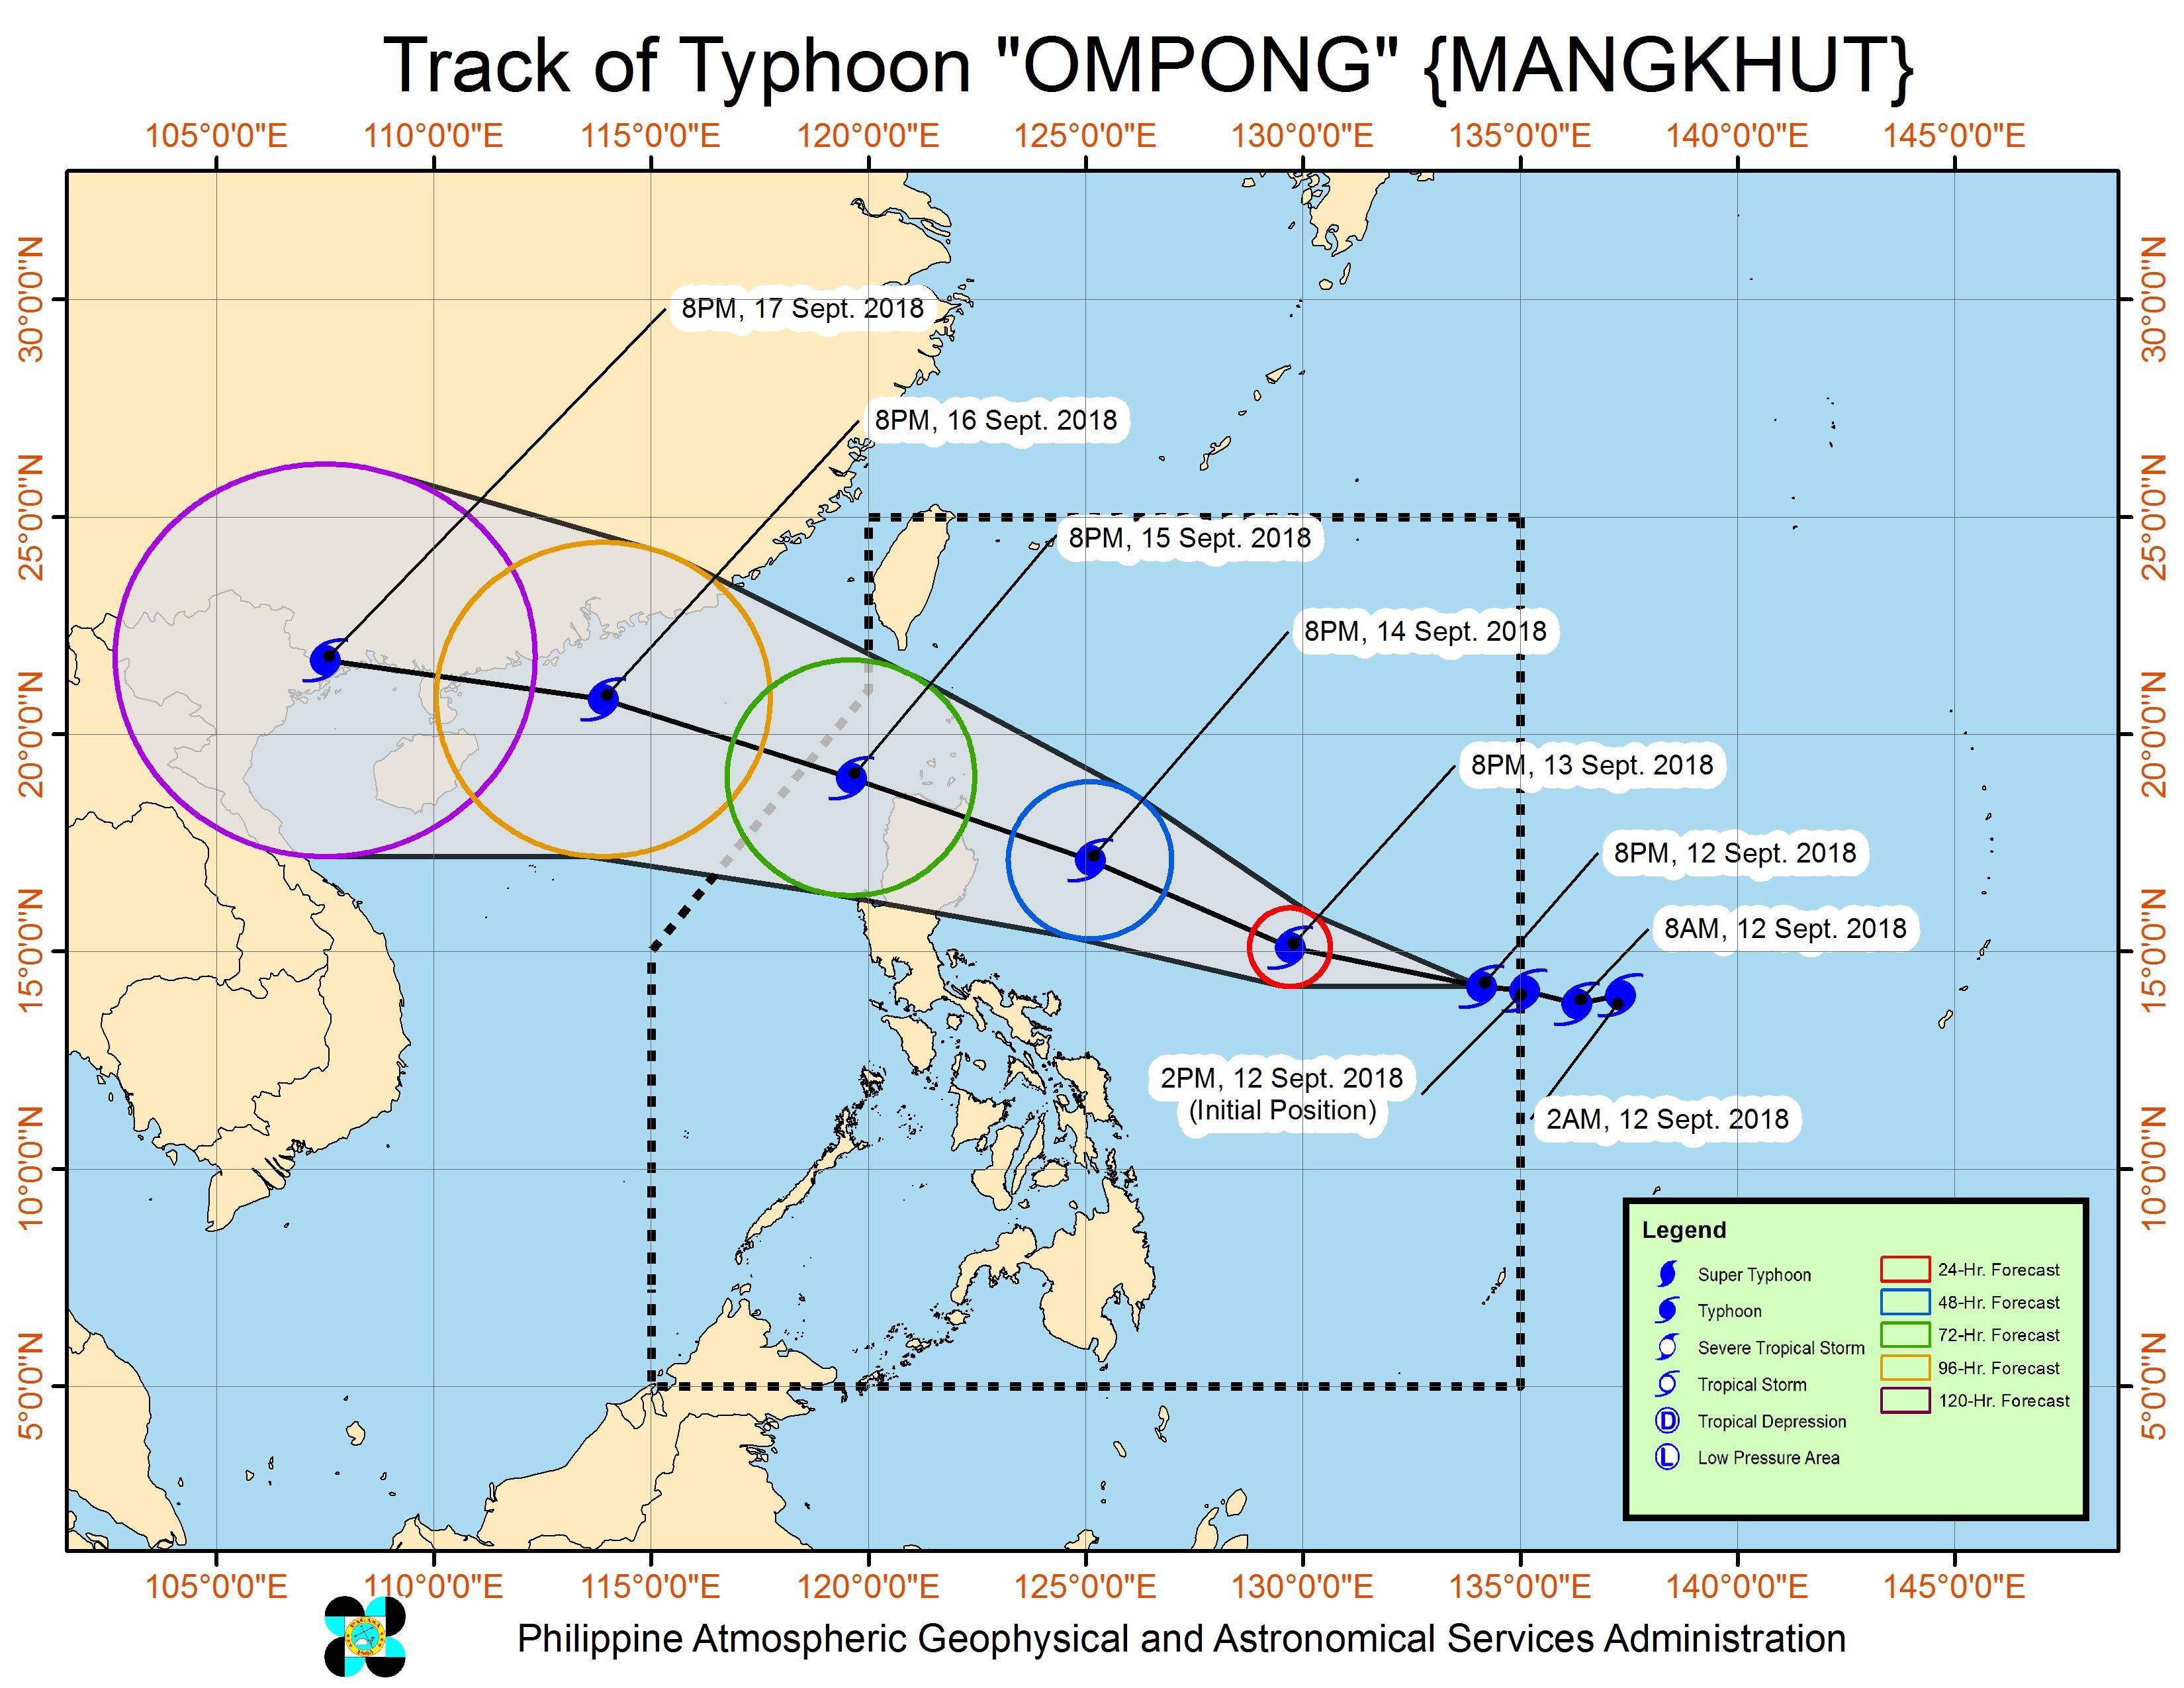 Forecast track of Typhoon Ompong (Mangkhut) as of September 12, 2018, 11 pm. Image from PAGASA 